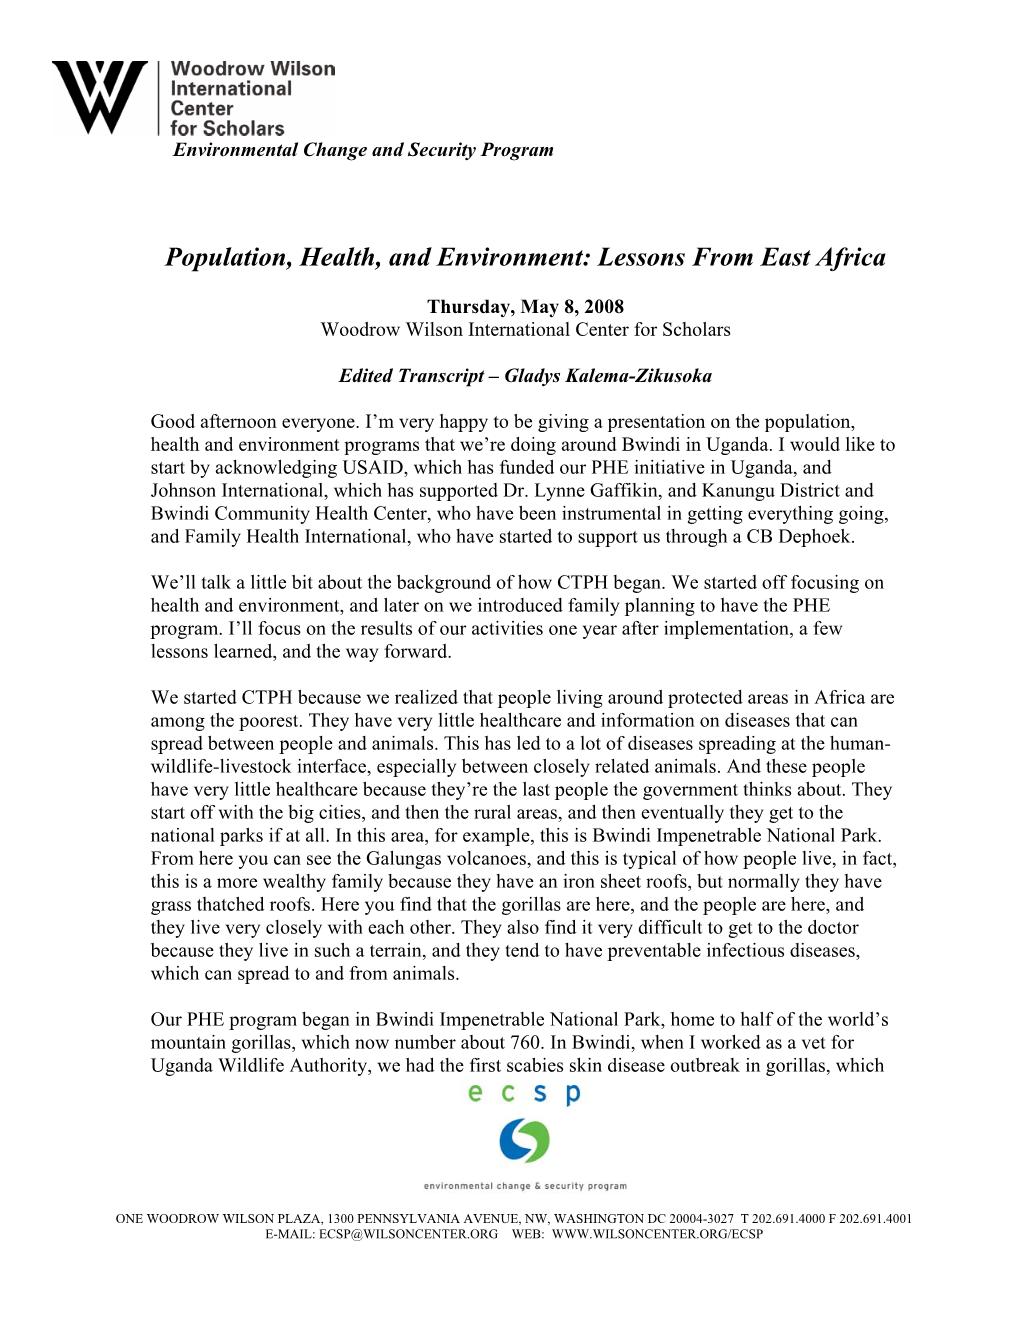 Population, Health, and Environment: Lessons from East Africadownload